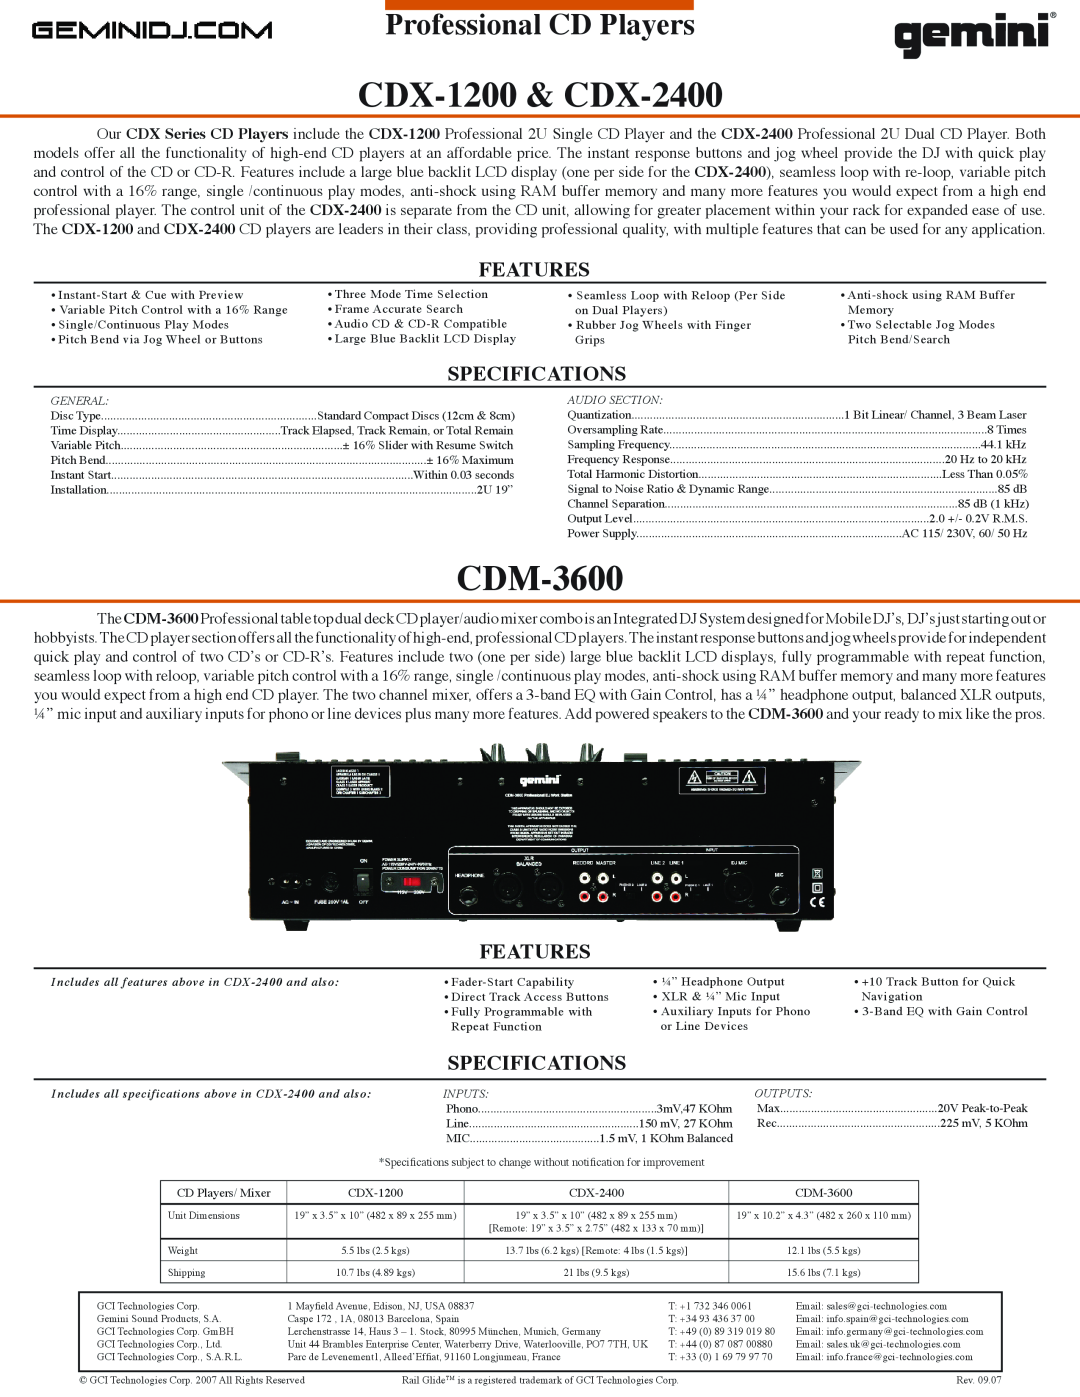 Gemini manual CDX-1200& CDX-2400, CDM-3600, Professional CD Players, Features, Specifications, Audio Section 